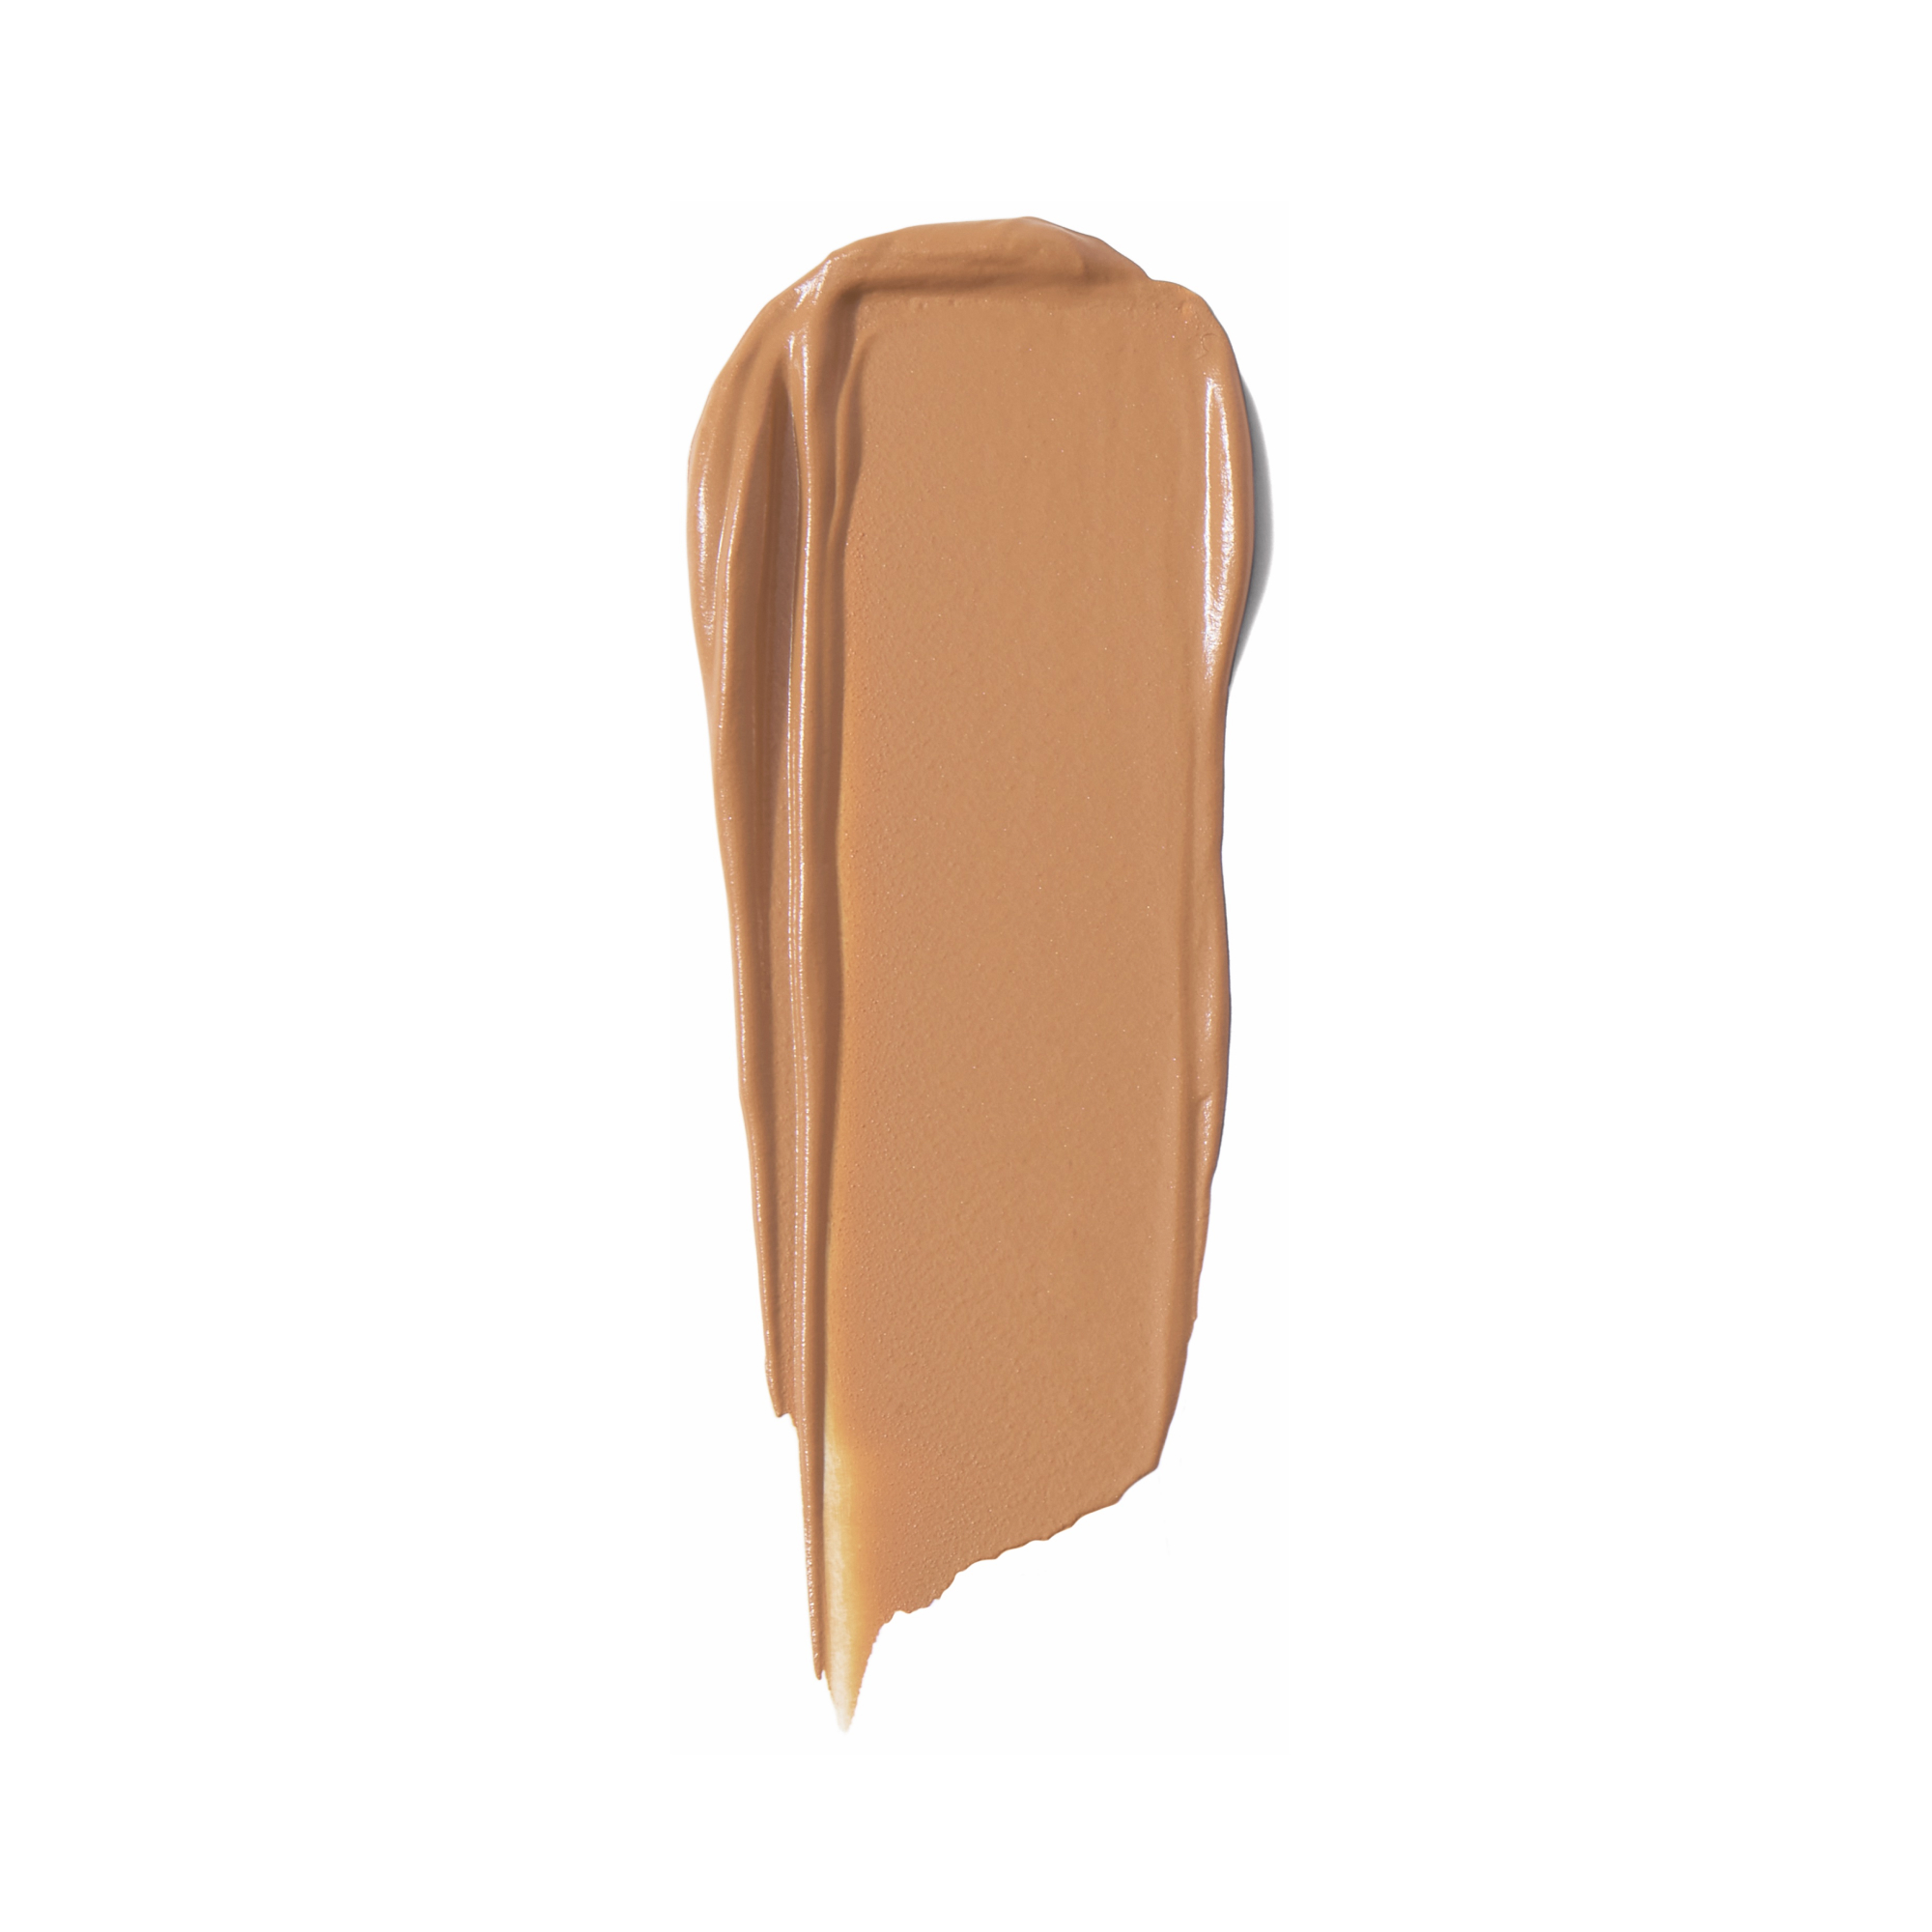 Benefit Cosmetics Boi-ing Bright On Concealer - Full Lightweight Brightening In Brown, Size: Full Si